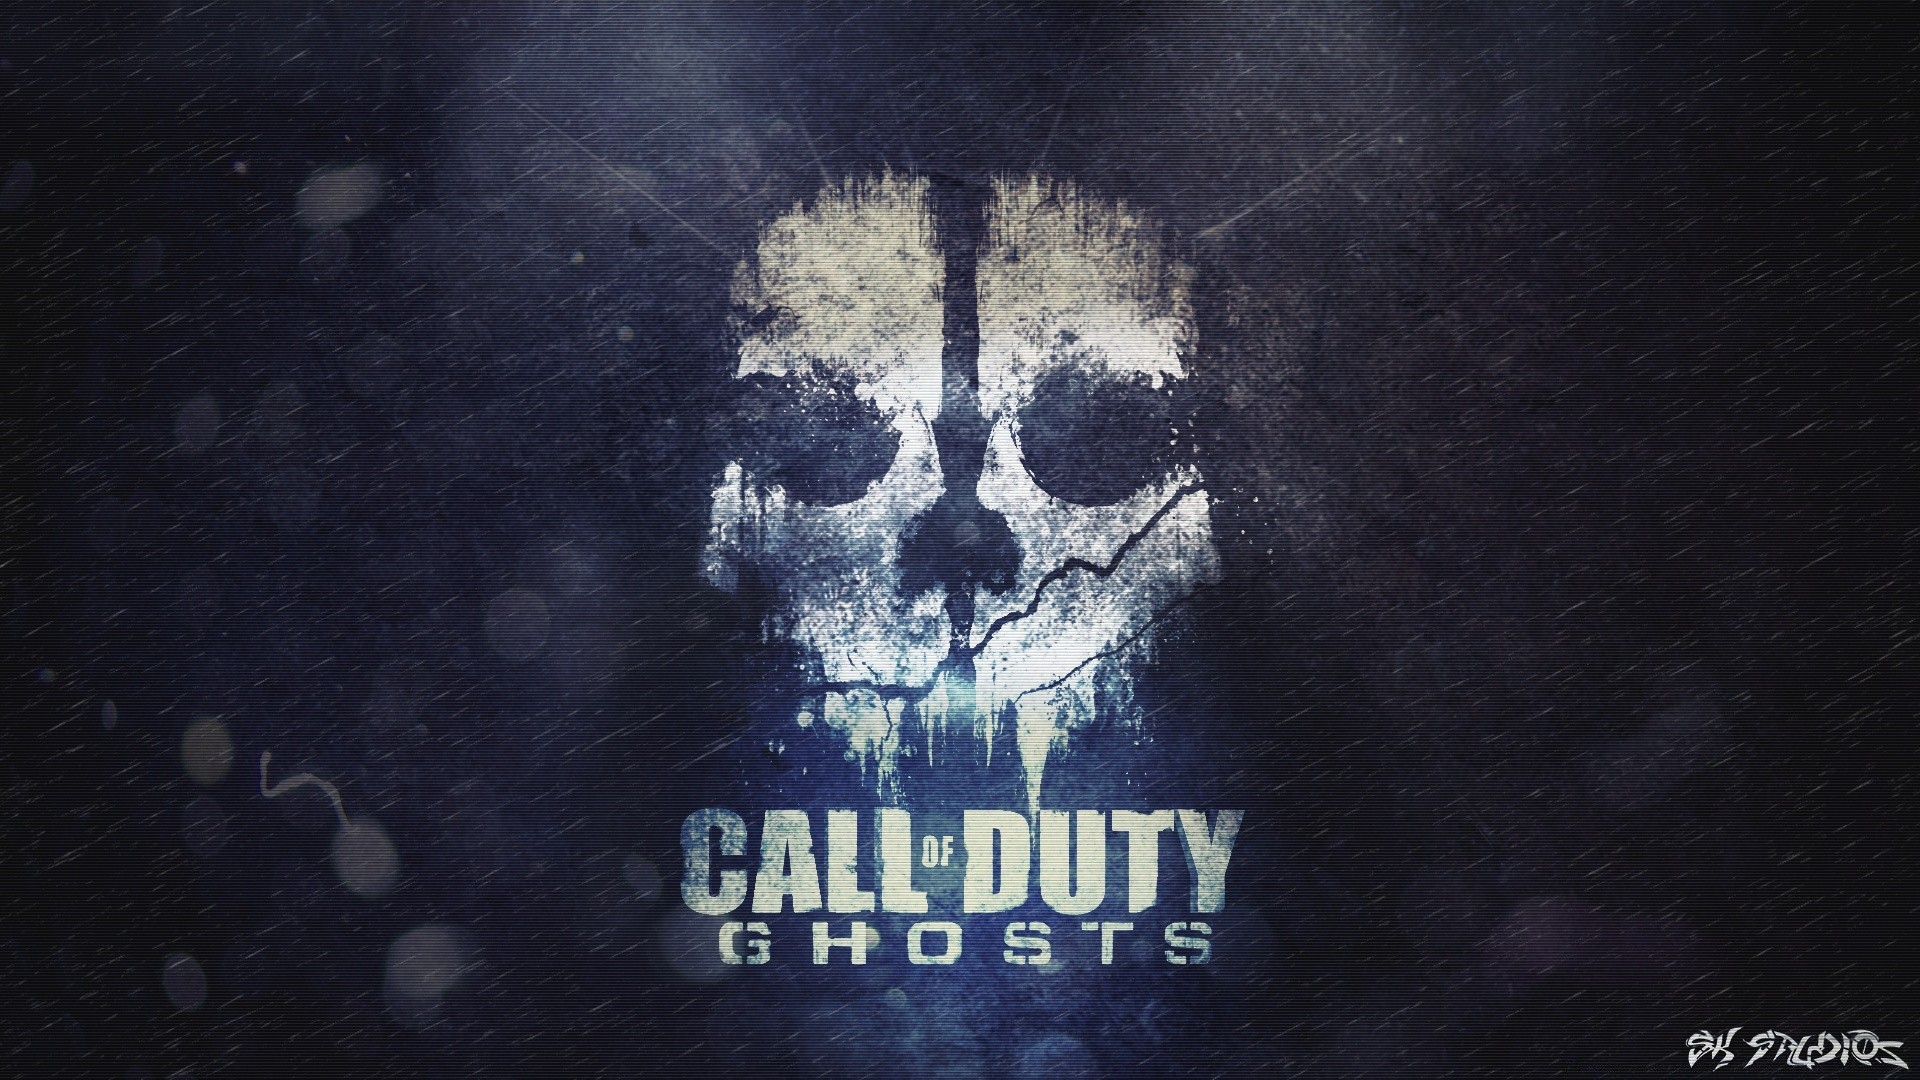 Call of duty skull on a dark background phone background image